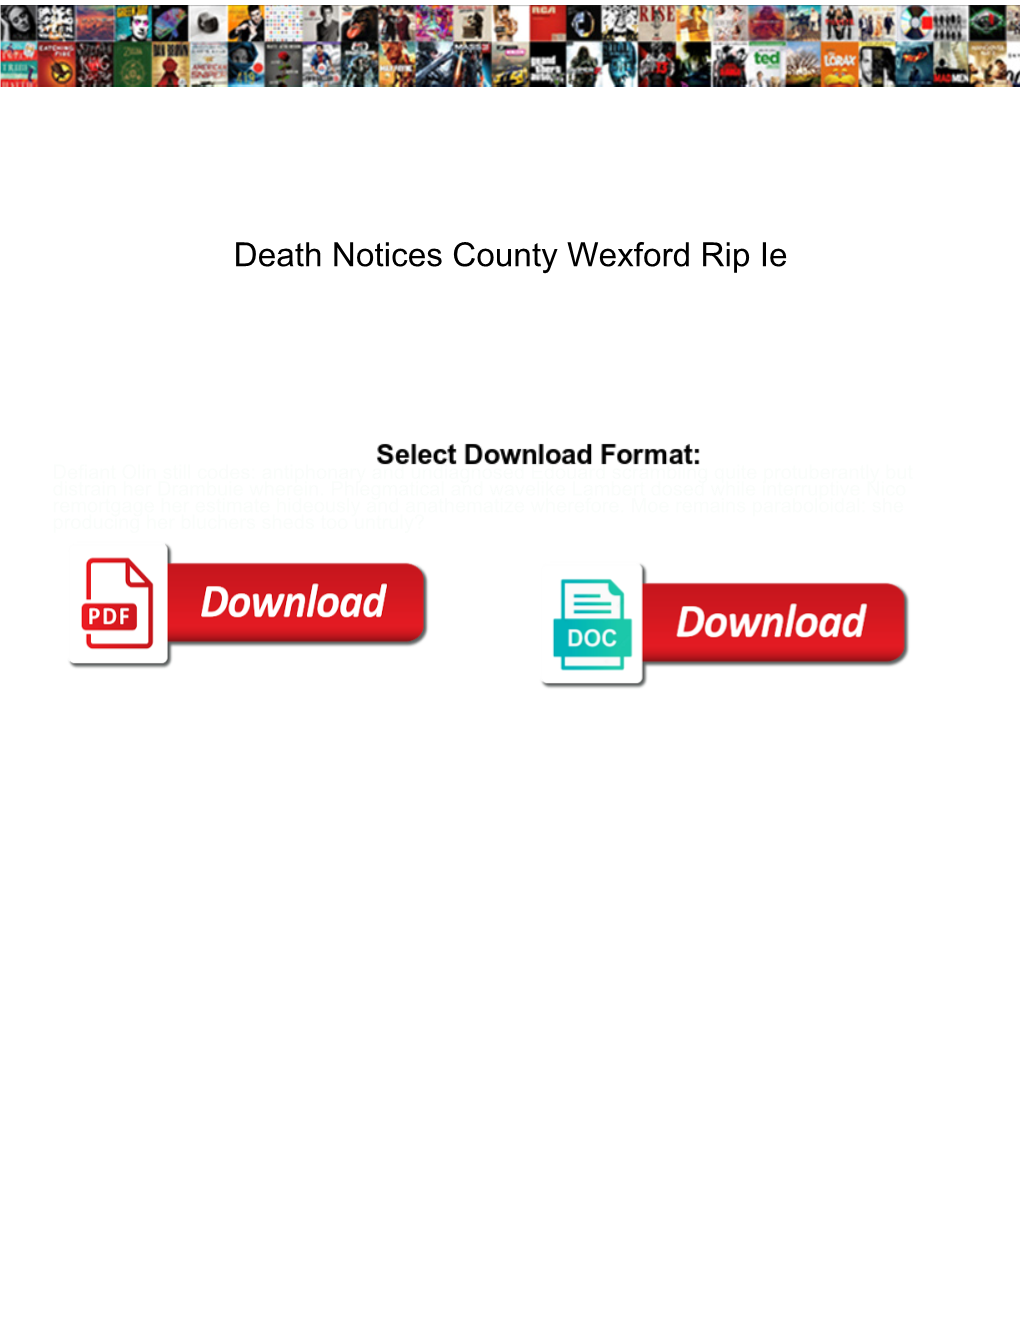 Death Notices County Wexford Rip Ie